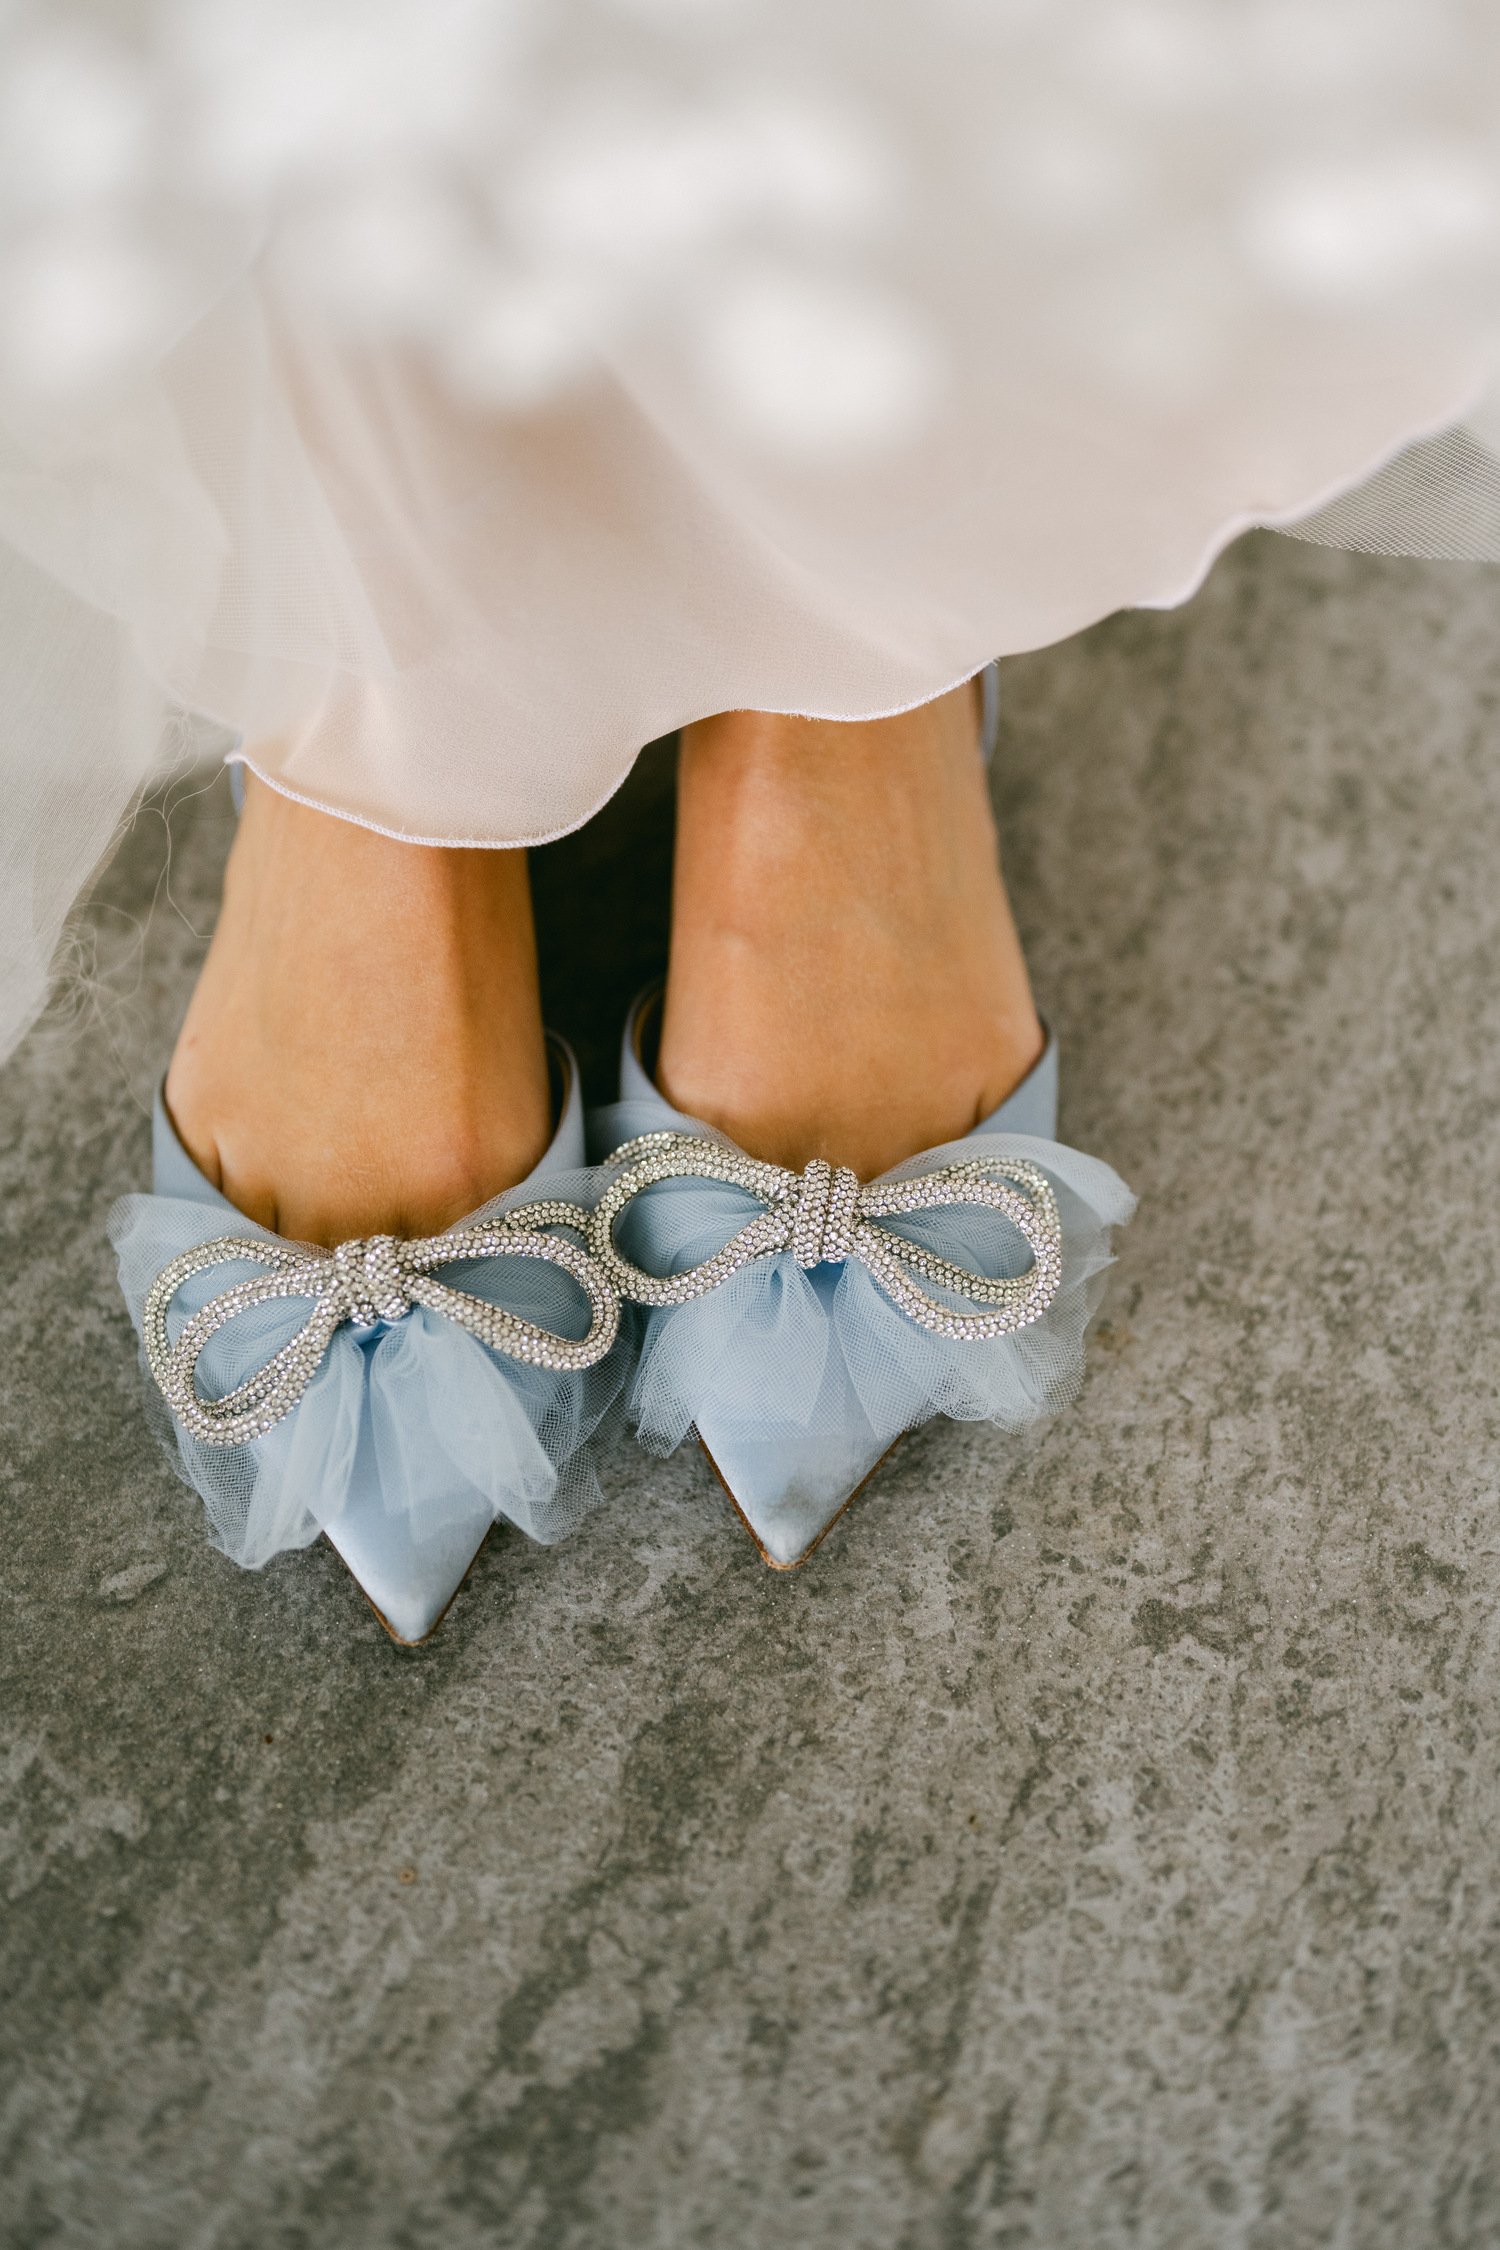 Elm Estate Wedding photos, photo of the bride's wedding shoes in blue with bow details